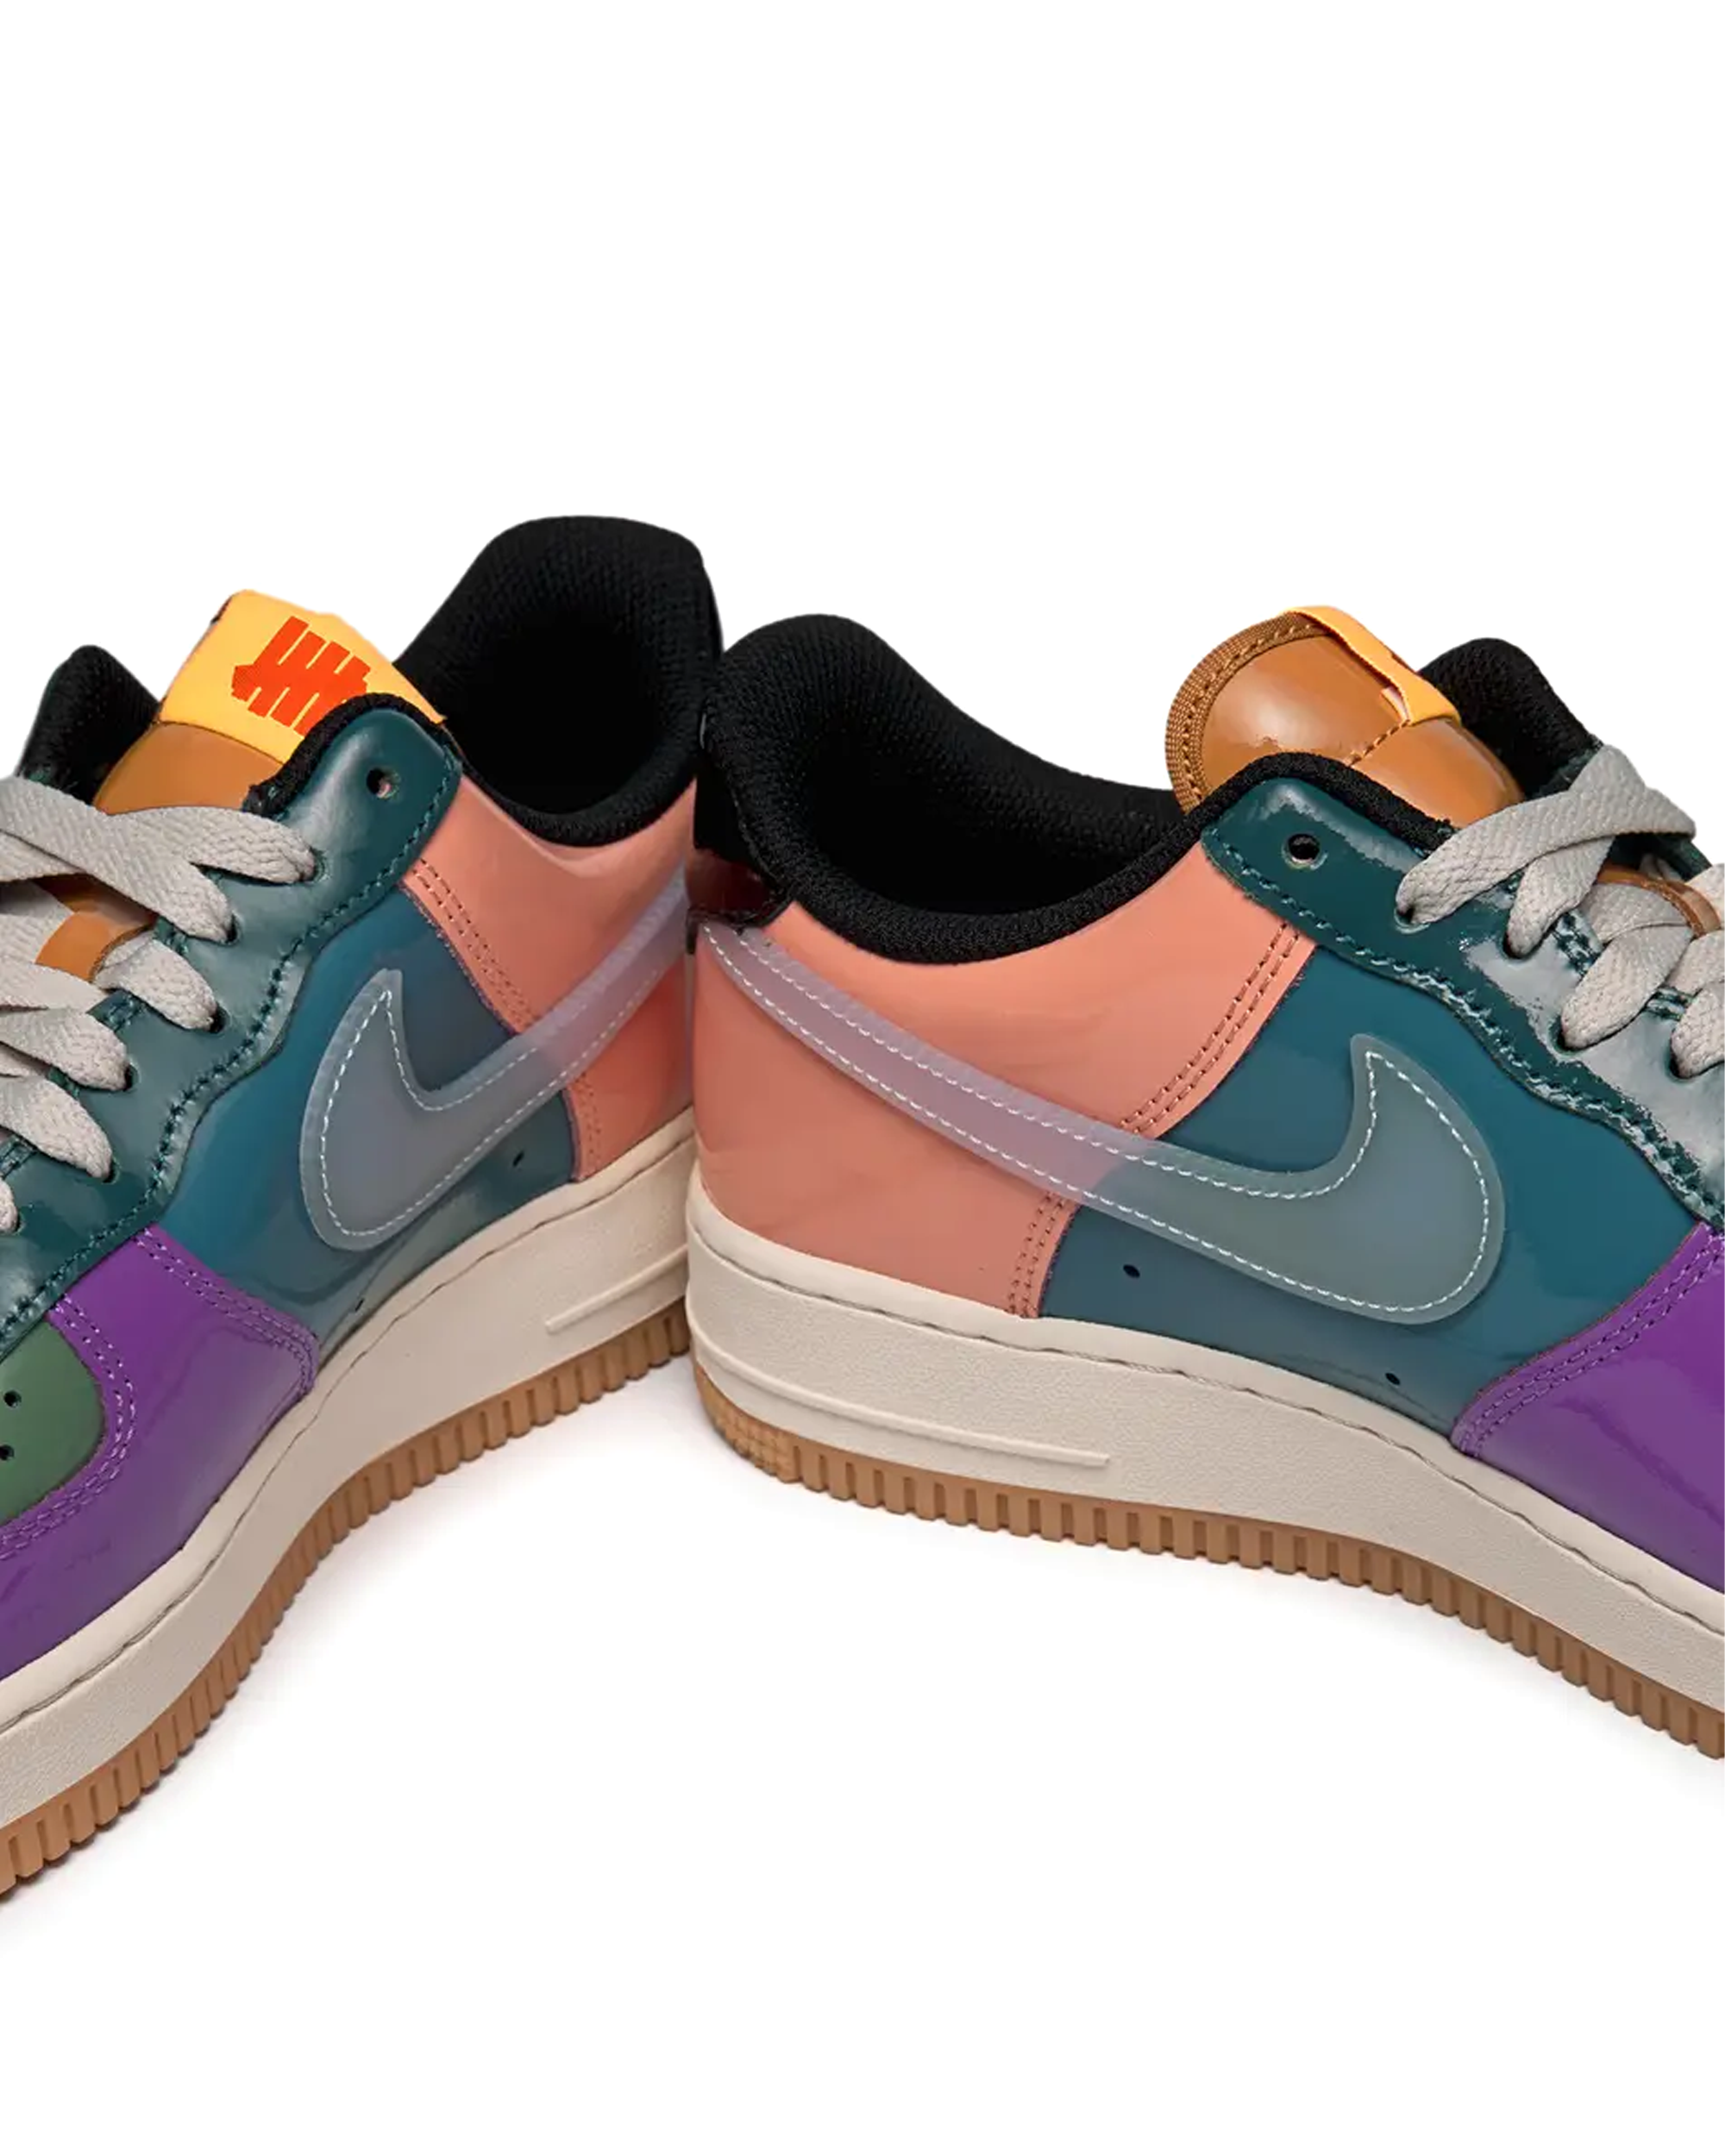 Air Force 1 Low x UNDEFEATED - Wild Berry / Celestine Blue / Multi-Colour